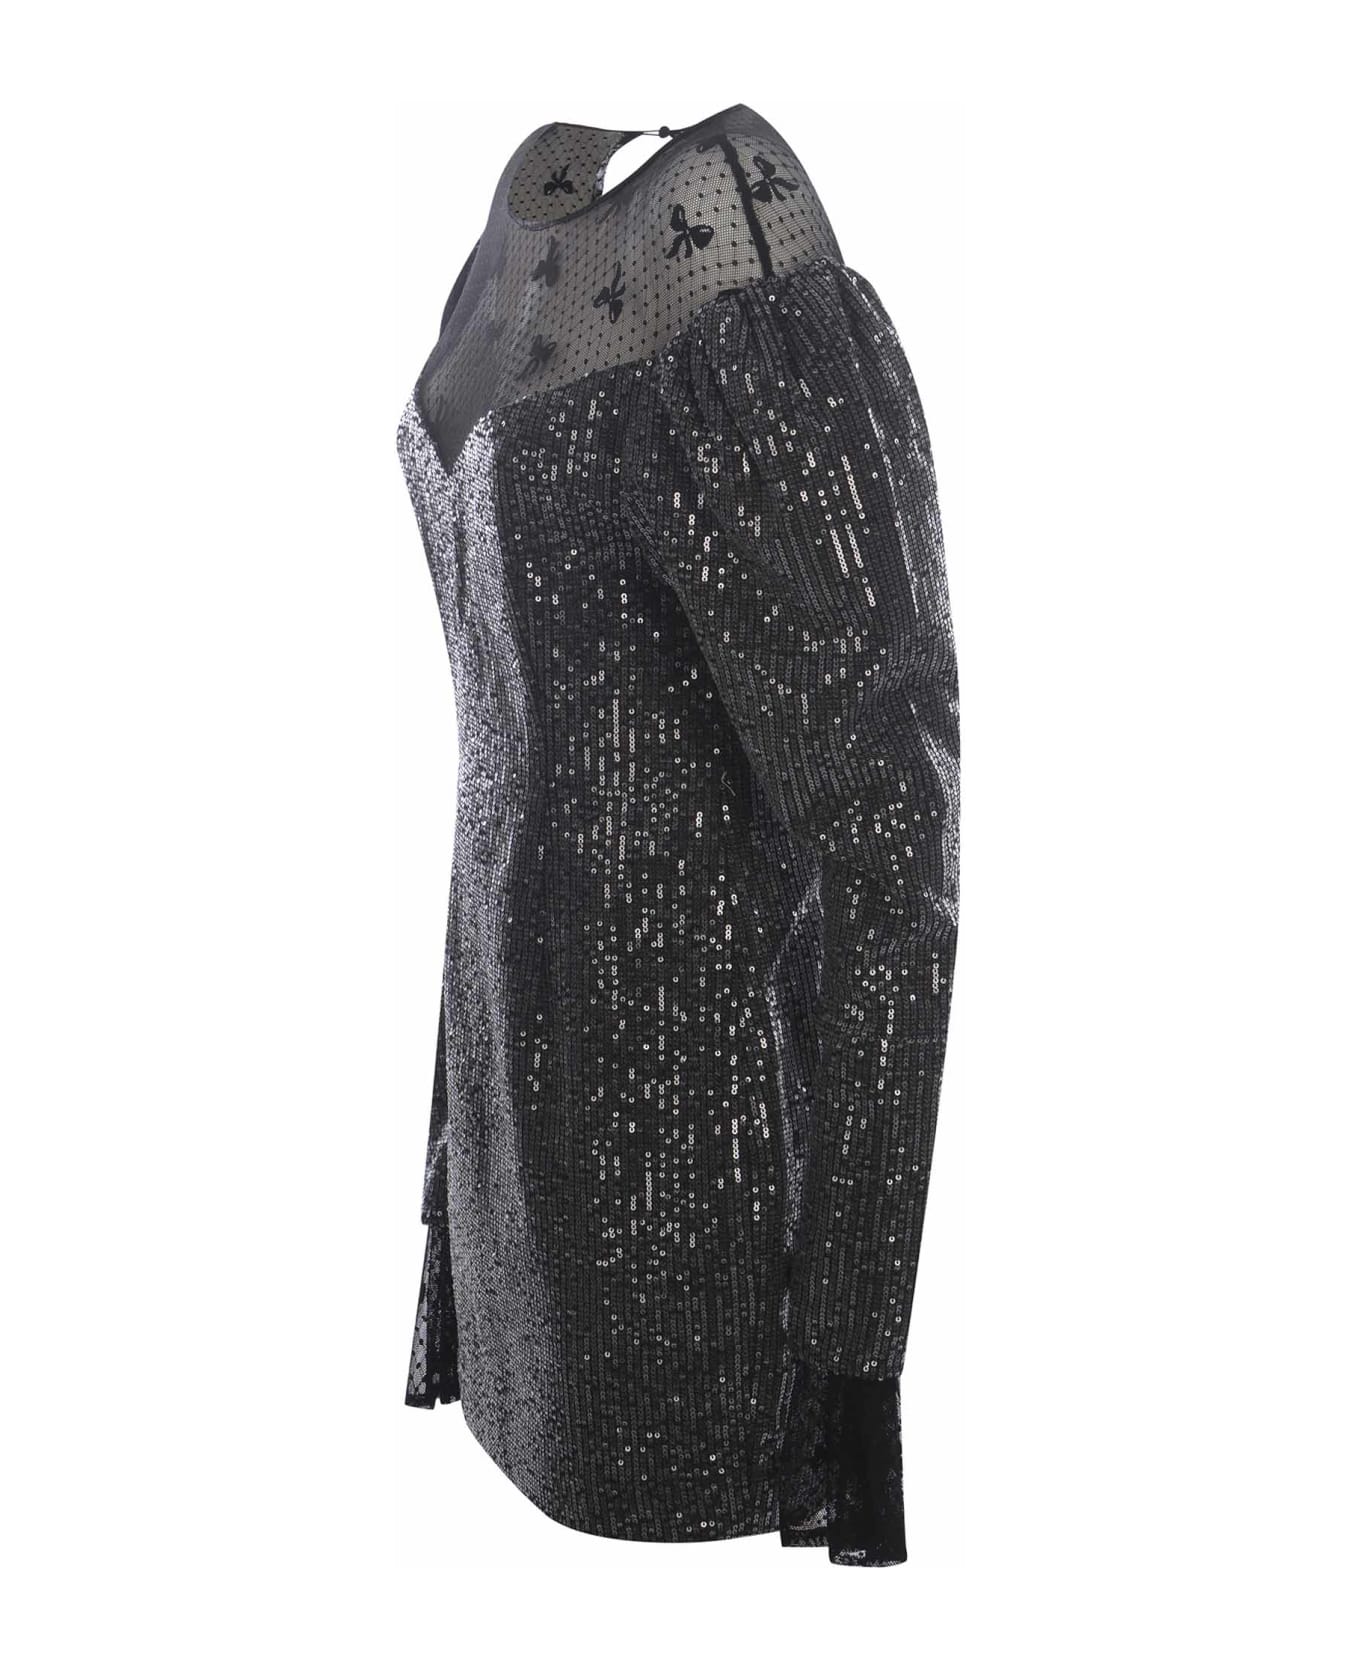 Rotate by Birger Christensen Dress Rotate "sequins" Made Of Twill - Nero